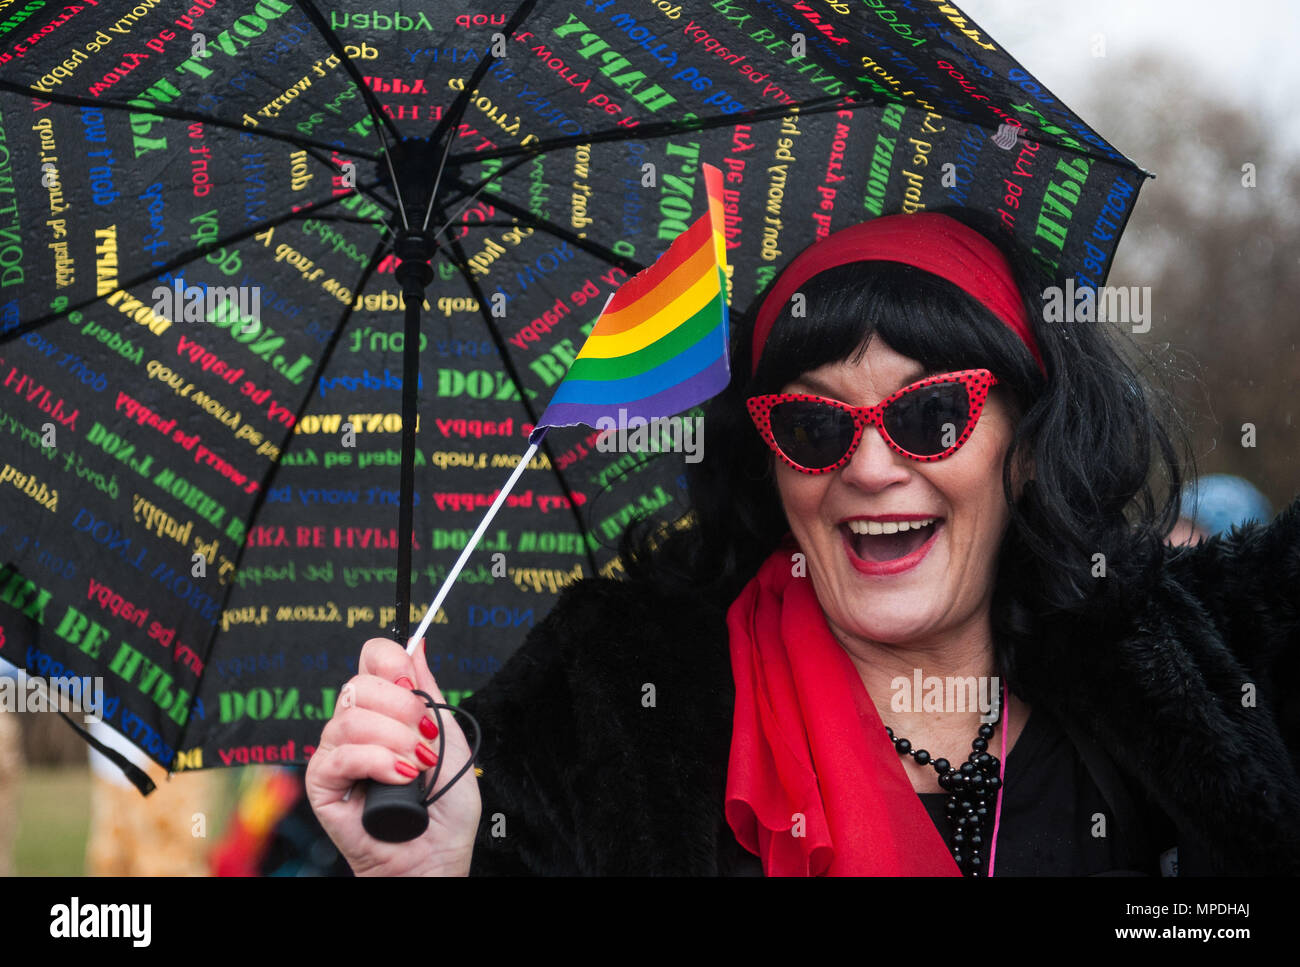 A woman waves a rainbow flag during fasching, a festival held across Europe, in the city of Ramstein, Germany, Feb. 28, 2017. The festival has been recognized and celebrated since the 13th century. Written records show the first carnival was held in 1341 in Köln, Germany. (U.S. Air Force photo by Senior Airman Lane T. Plummer) Stock Photo